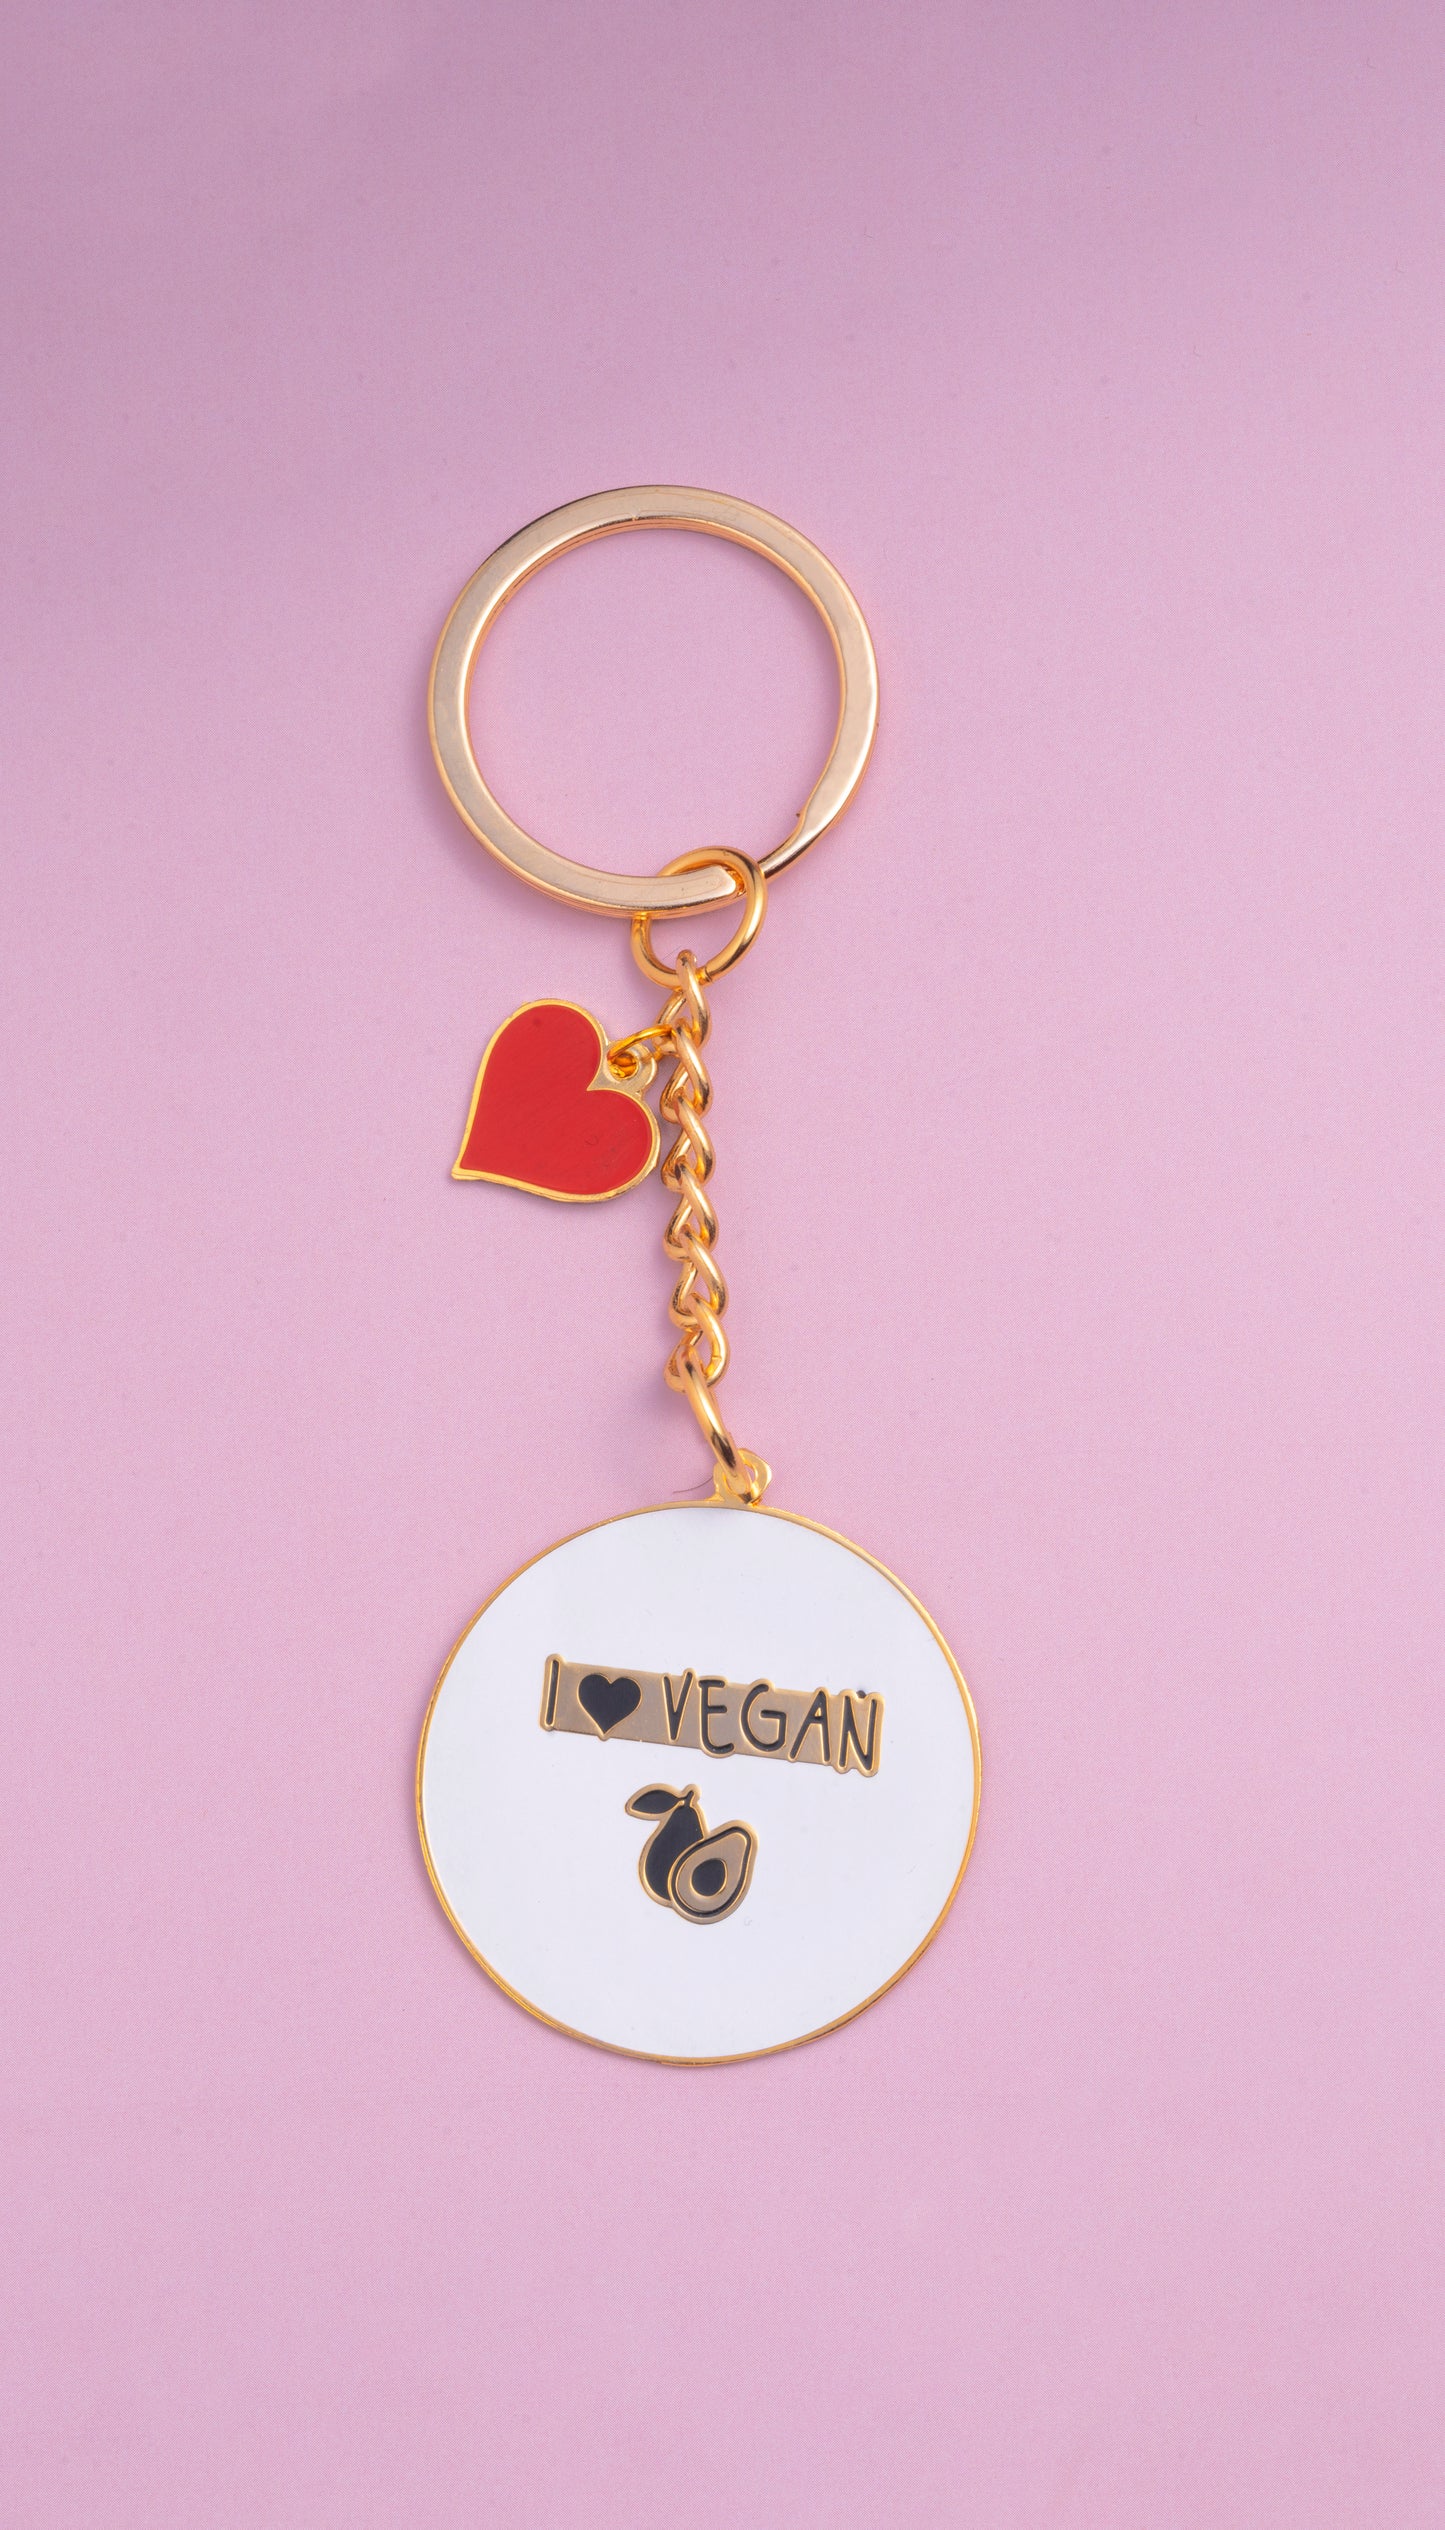 'I Love Vegan' Keychain (with Heart Pendant) - Organic Shop by Pure & Eco India